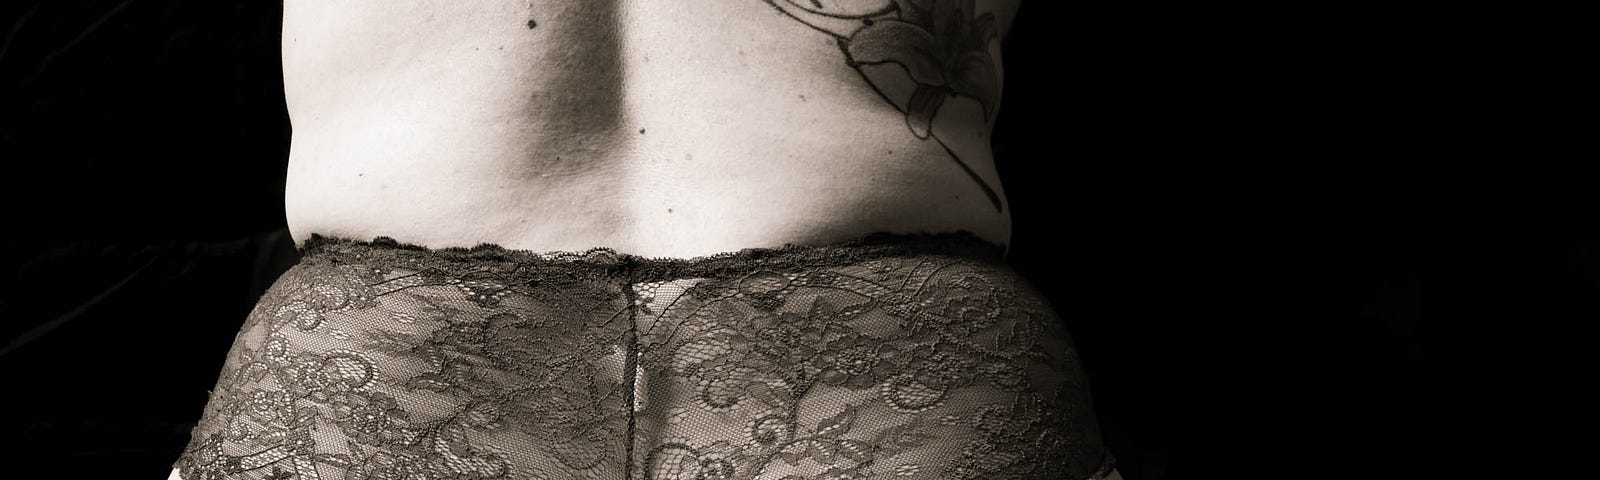 Black and white image of me taken from behind, wearing panties that show my bottom.